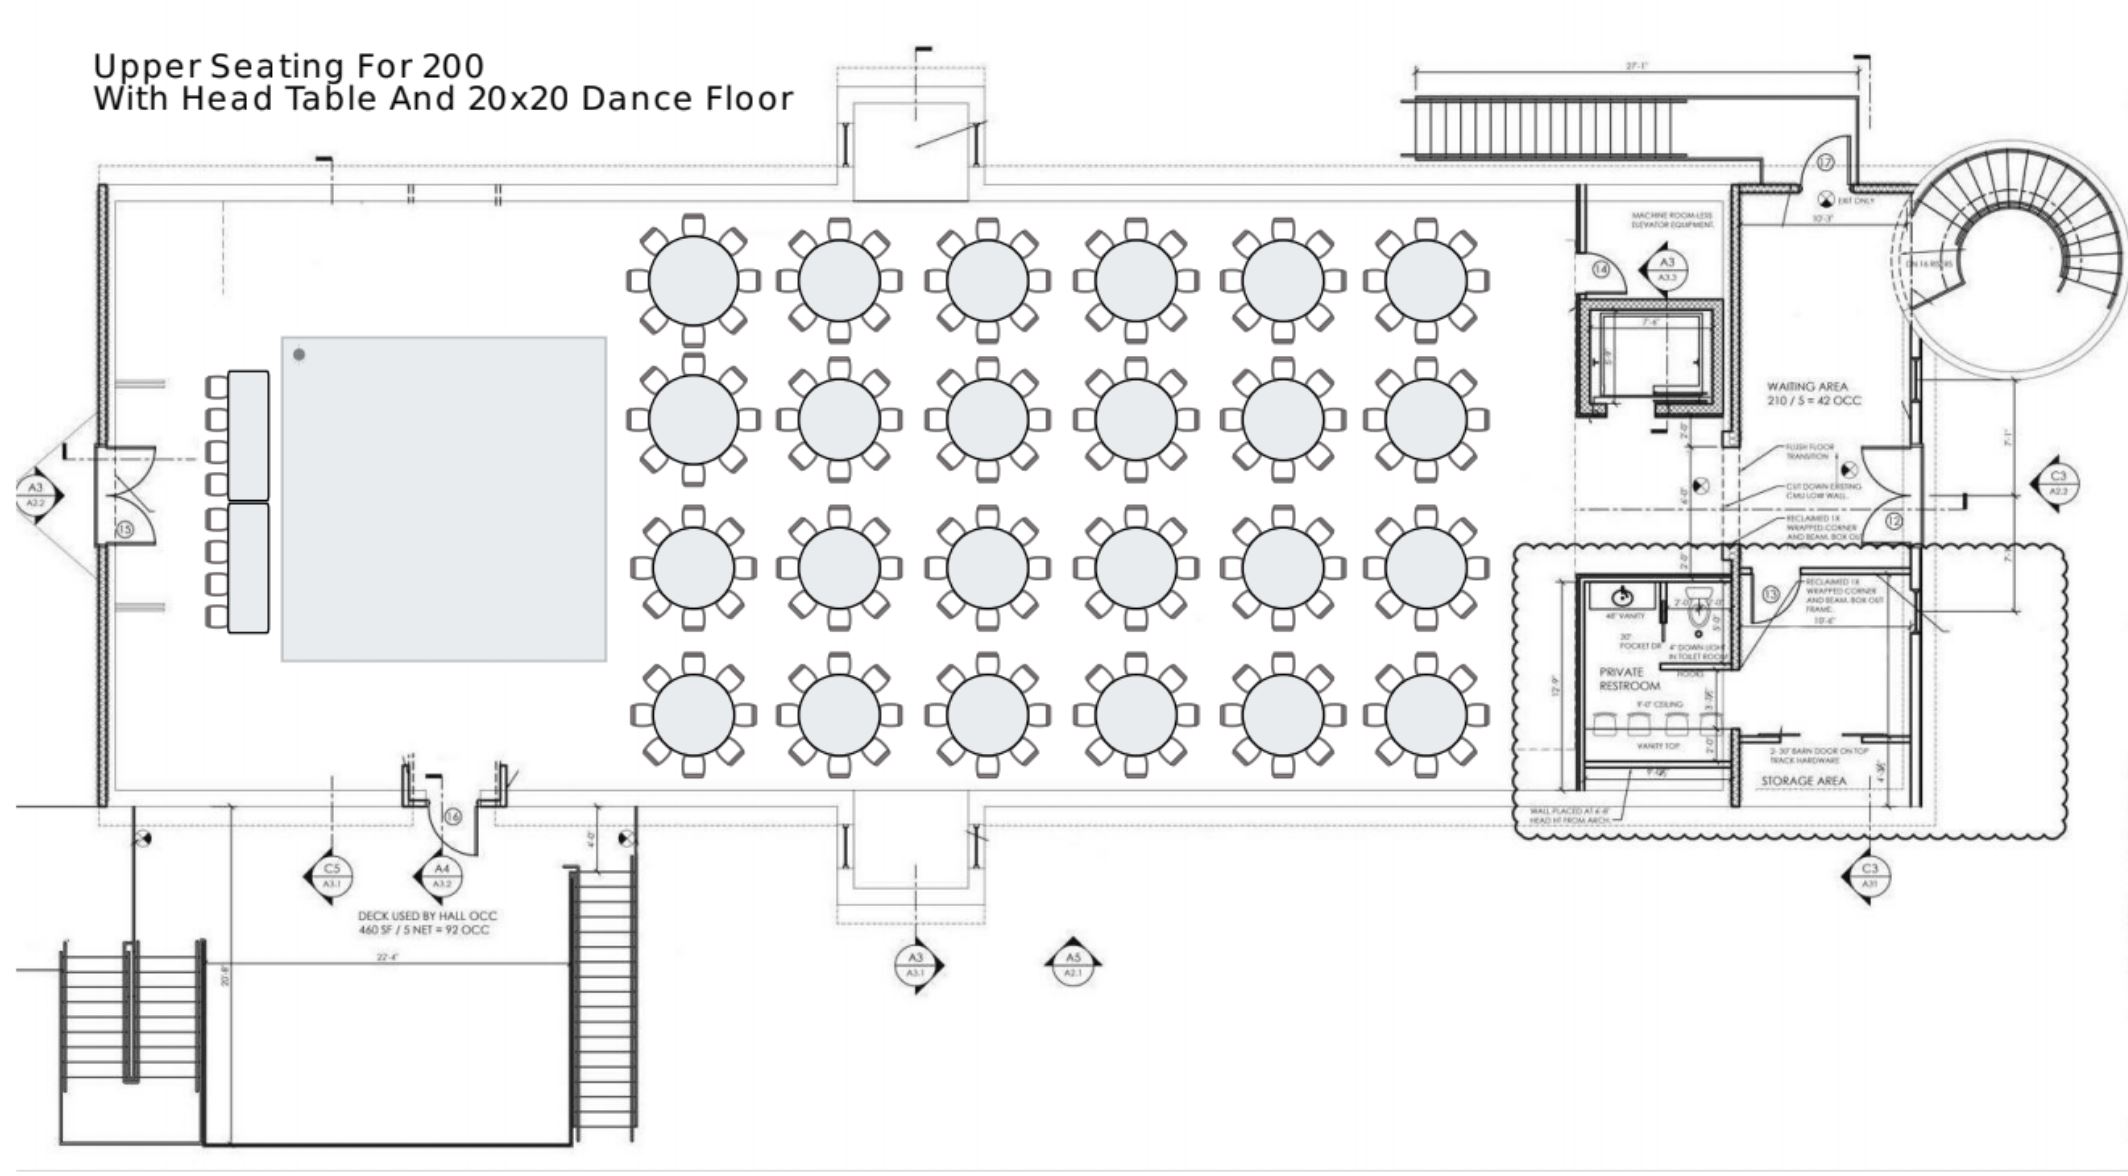 Floor Plan Banquet Layout Another Home Image Ideas